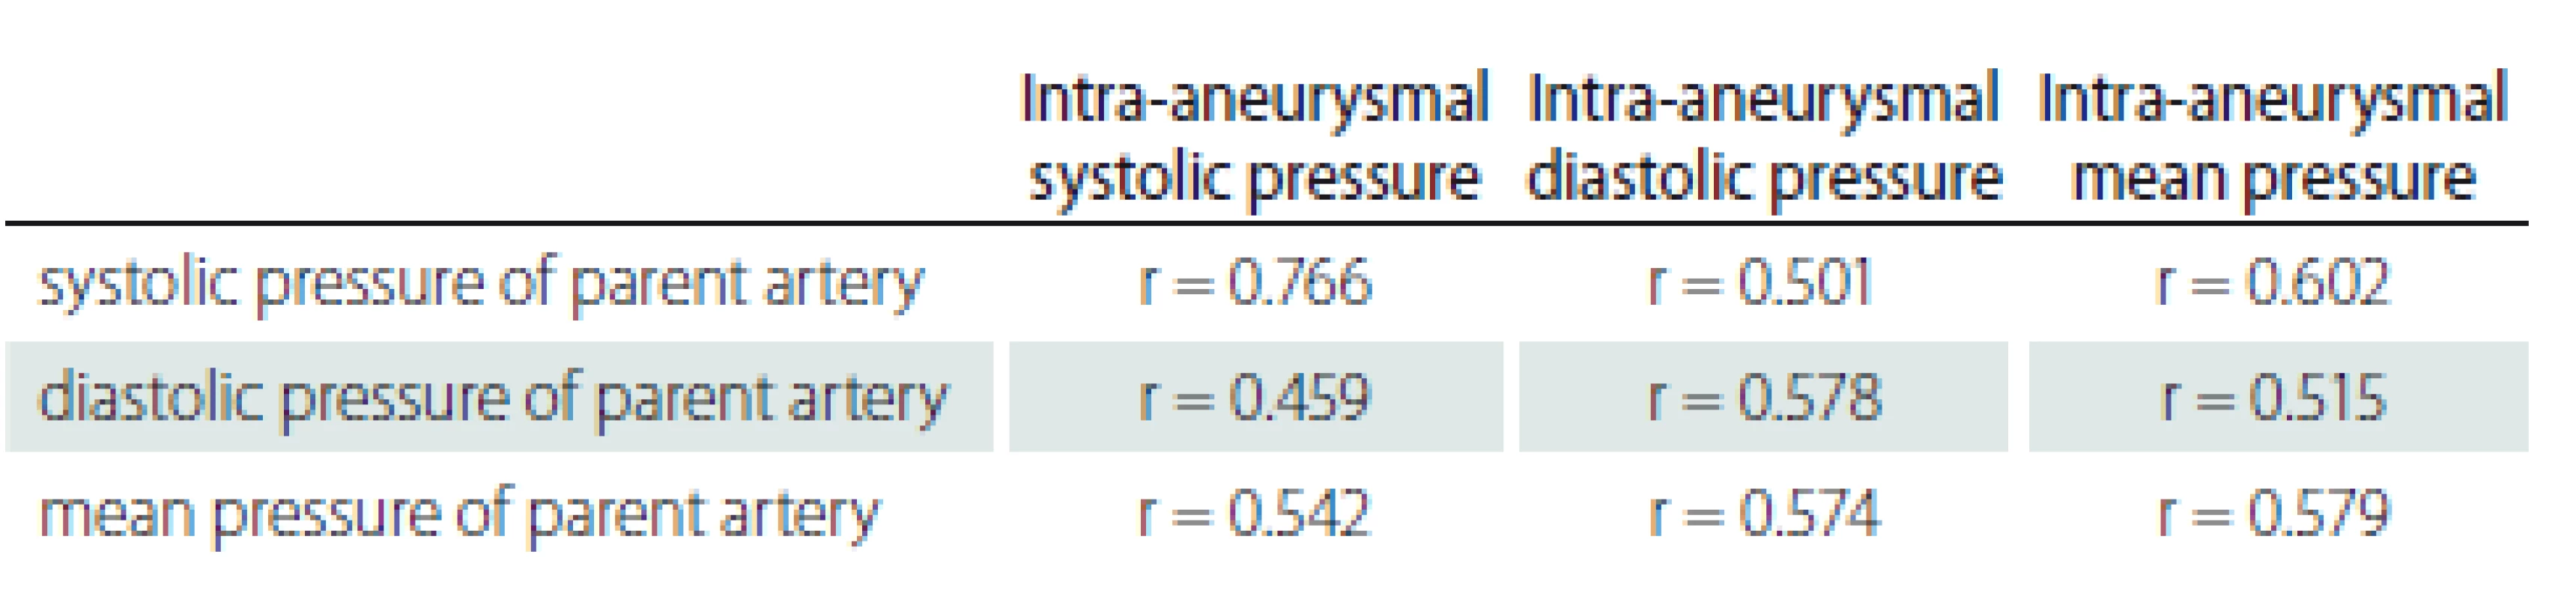 Evaluation of the relationship between aneurysm sac and parent artery
pressures